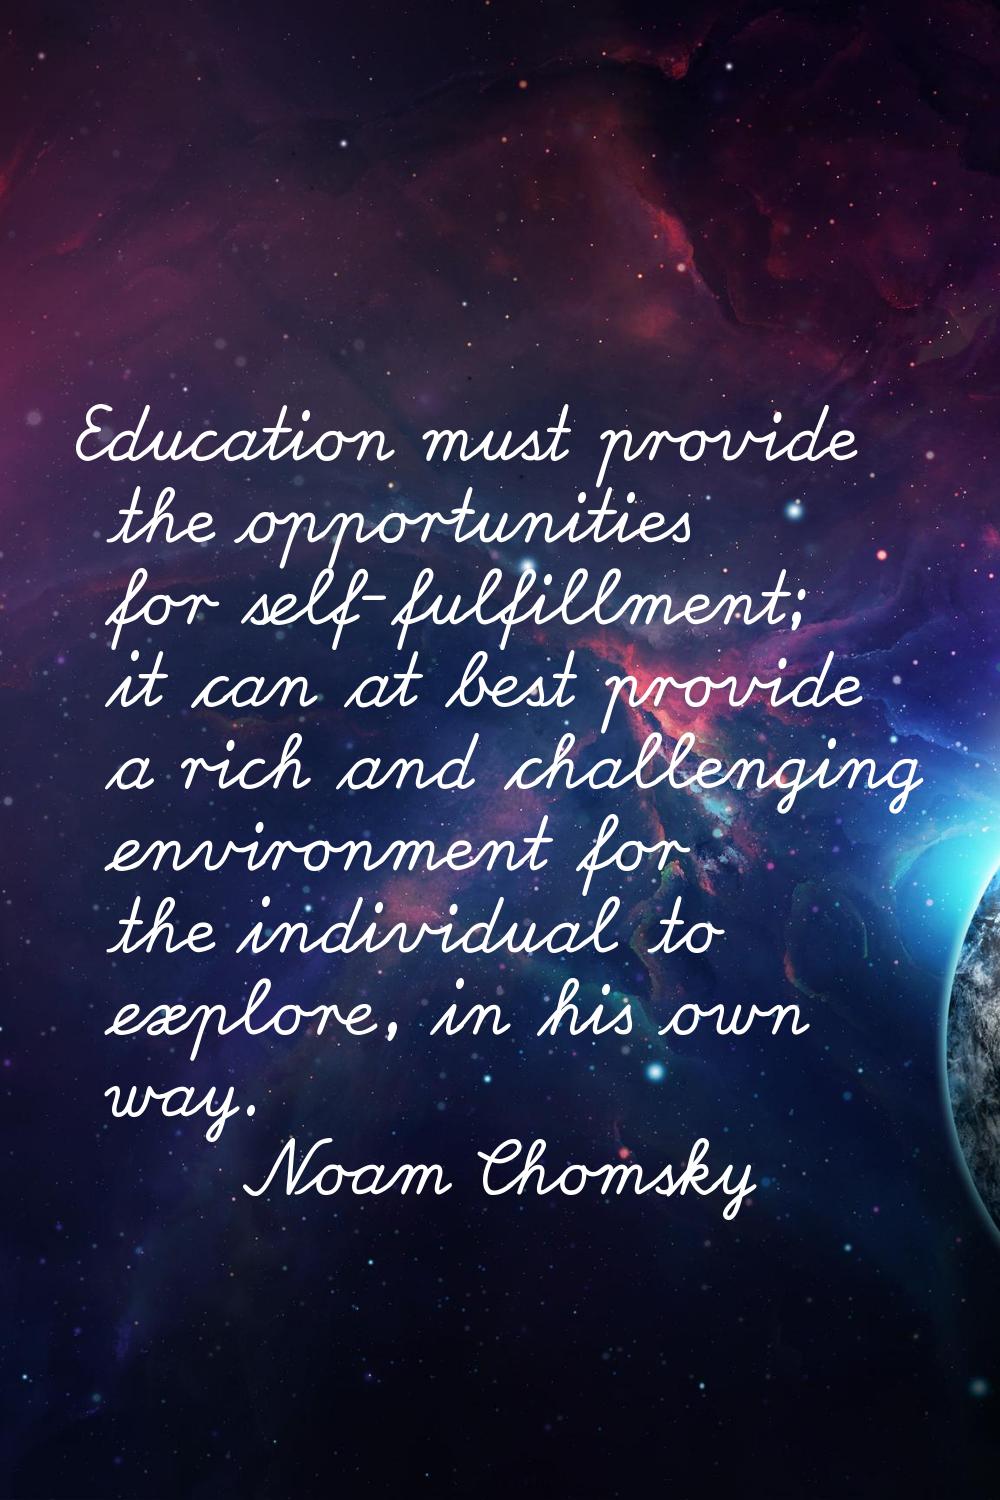 Education must provide the opportunities for self-fulfillment; it can at best provide a rich and ch